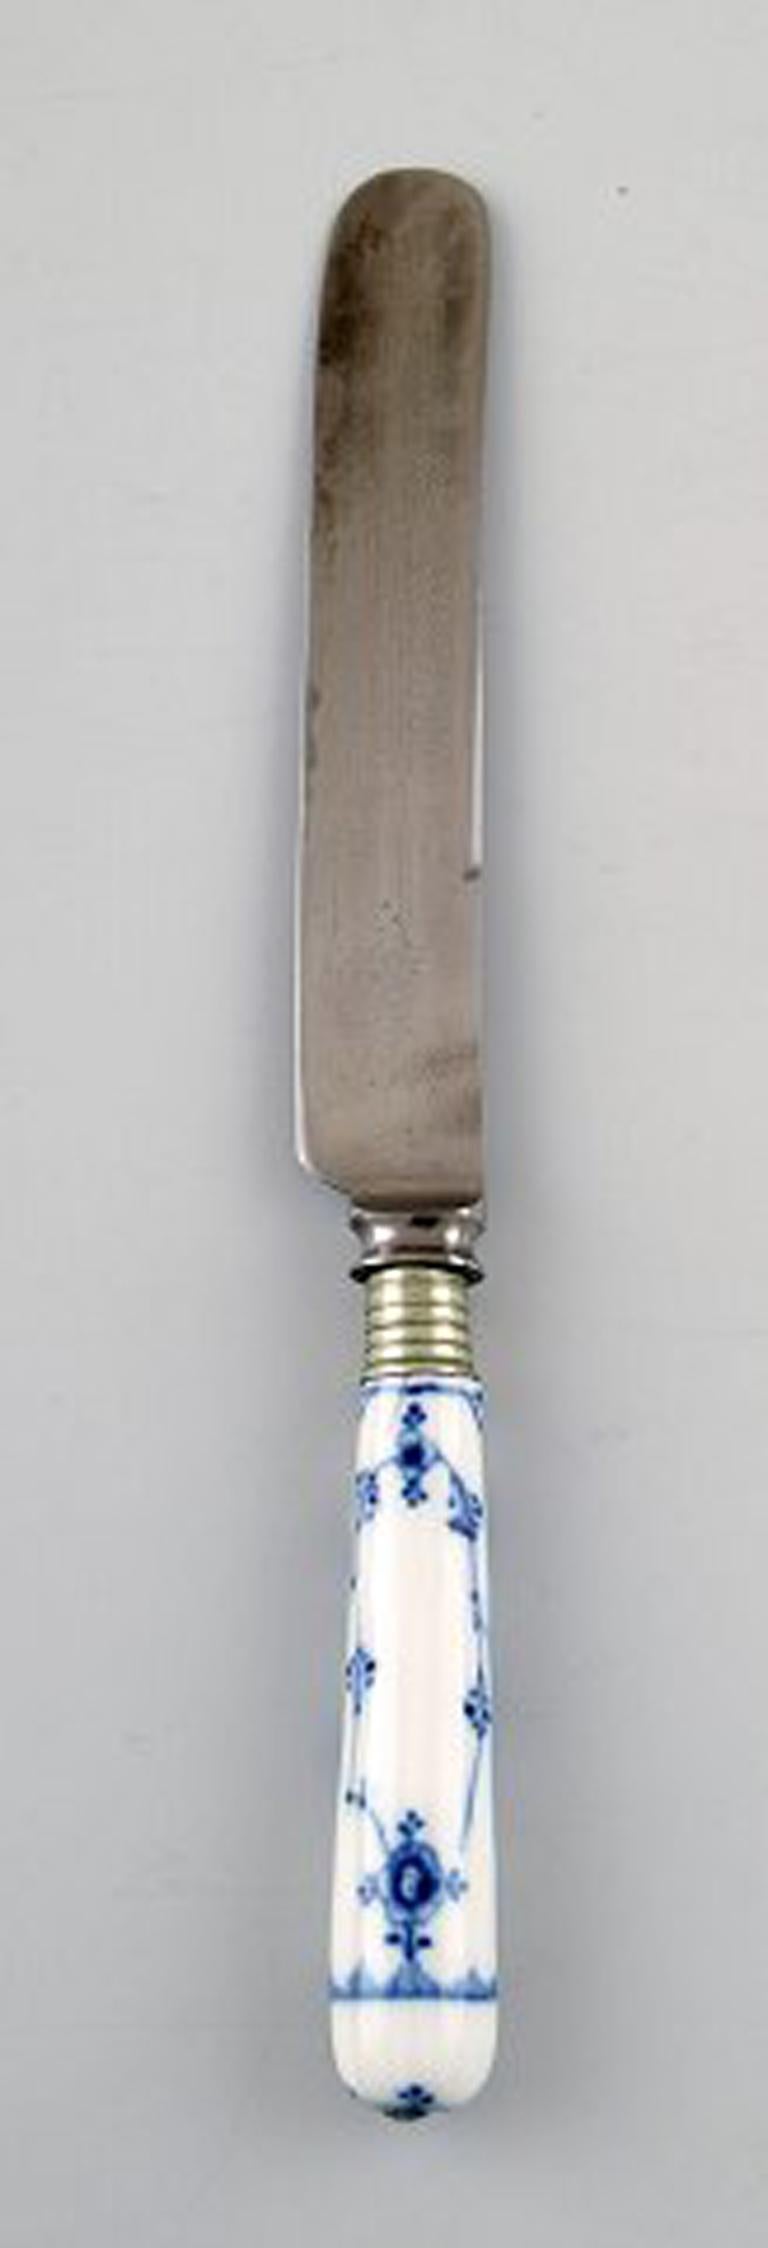 Blue fluted plain, 3 dinner knives and two lunch knives from Royal Copenhagen / Raadvad.
Early 1900s.
Measures 25.5 cm. (longest)
In good condition, all with minor hairline cracks.